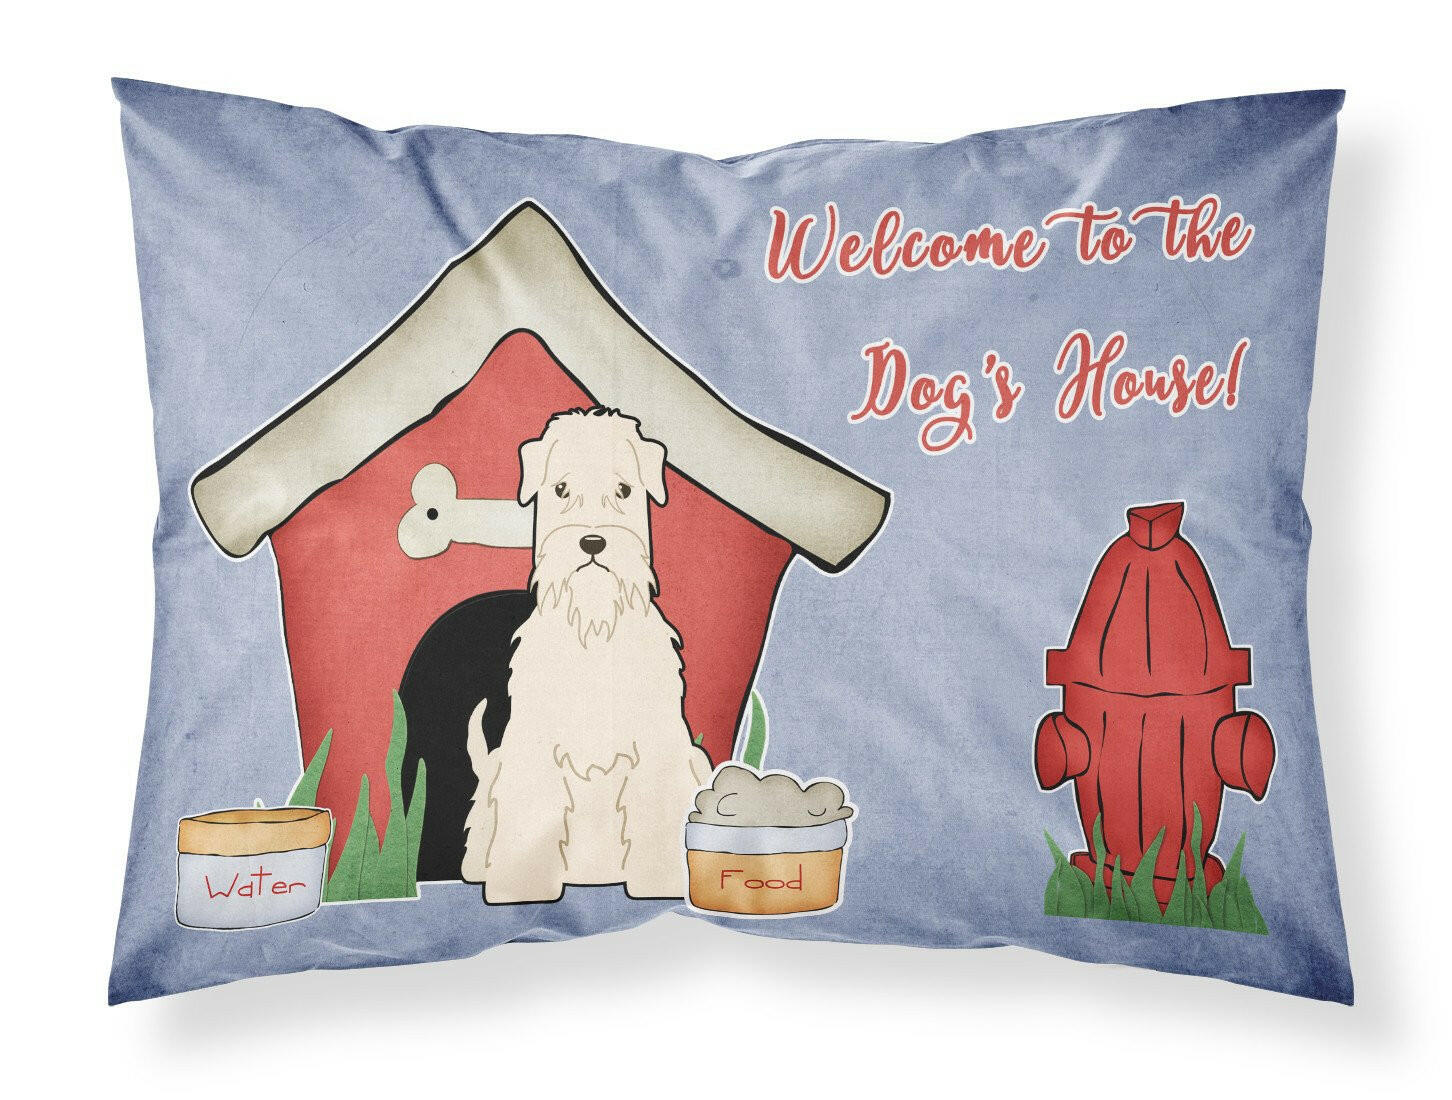 Dog House Collection Soft Coated Wheaten Terrier Fabric Standard Pillowcase BB2815PILLOWCASE by Caroline's Treasures